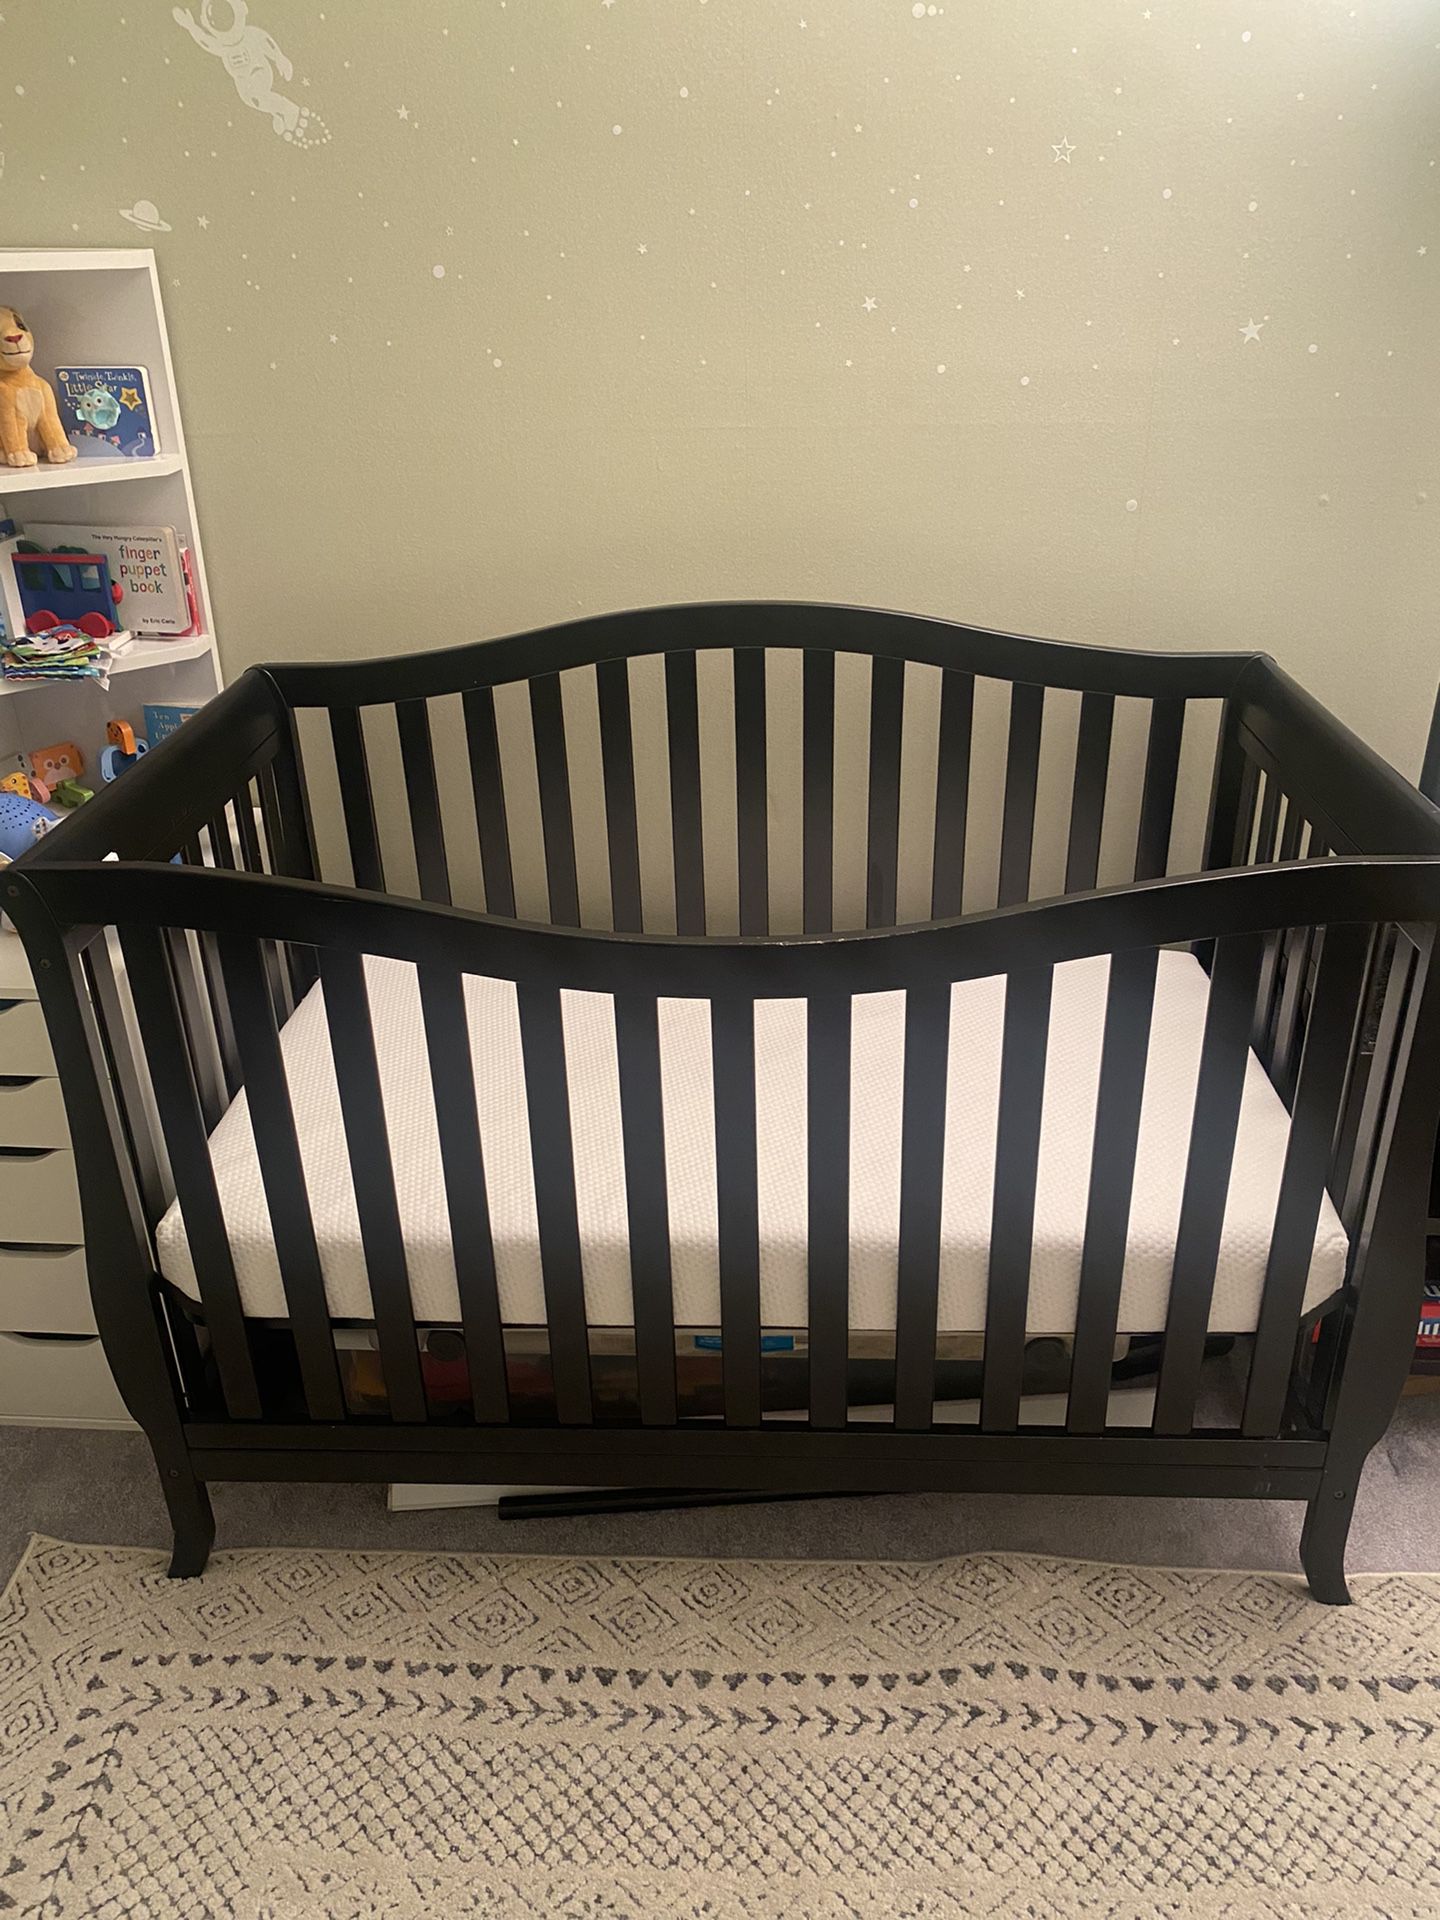 Black/ Wood Baby Crib With New Mattress $60. Cross Posted 